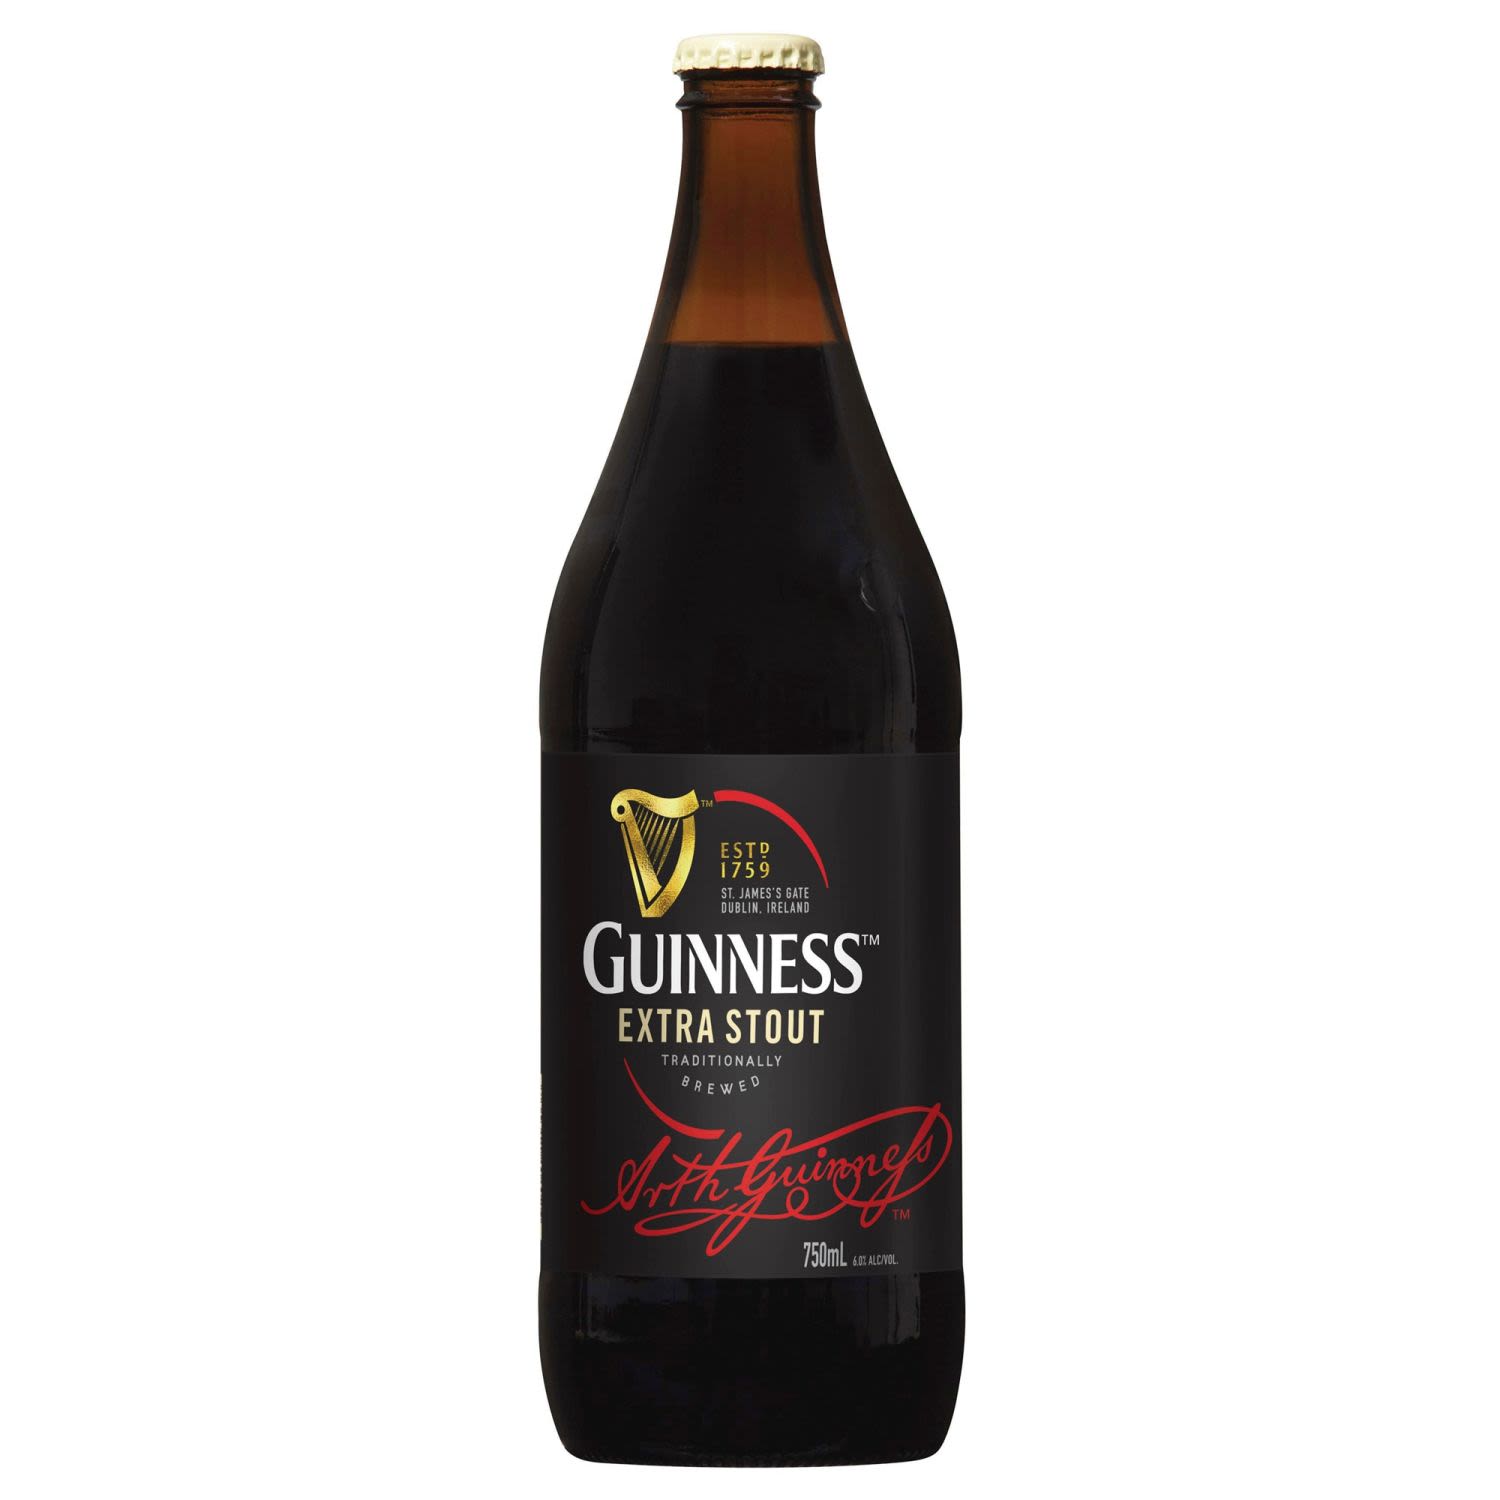 The crisp hint of roasted barley, the fresh breeze of hops. The refreshing bite. The bittersweet reward. Pure beauty; pure Guinness.<br /> <br />Alcohol Volume: 6.00%<br /><br />Pack Format: Bottle<br /><br />Standard Drinks: 3.6</br /><br />Pack Type: Bottle<br /><br />Country of Origin: Ireland<br />